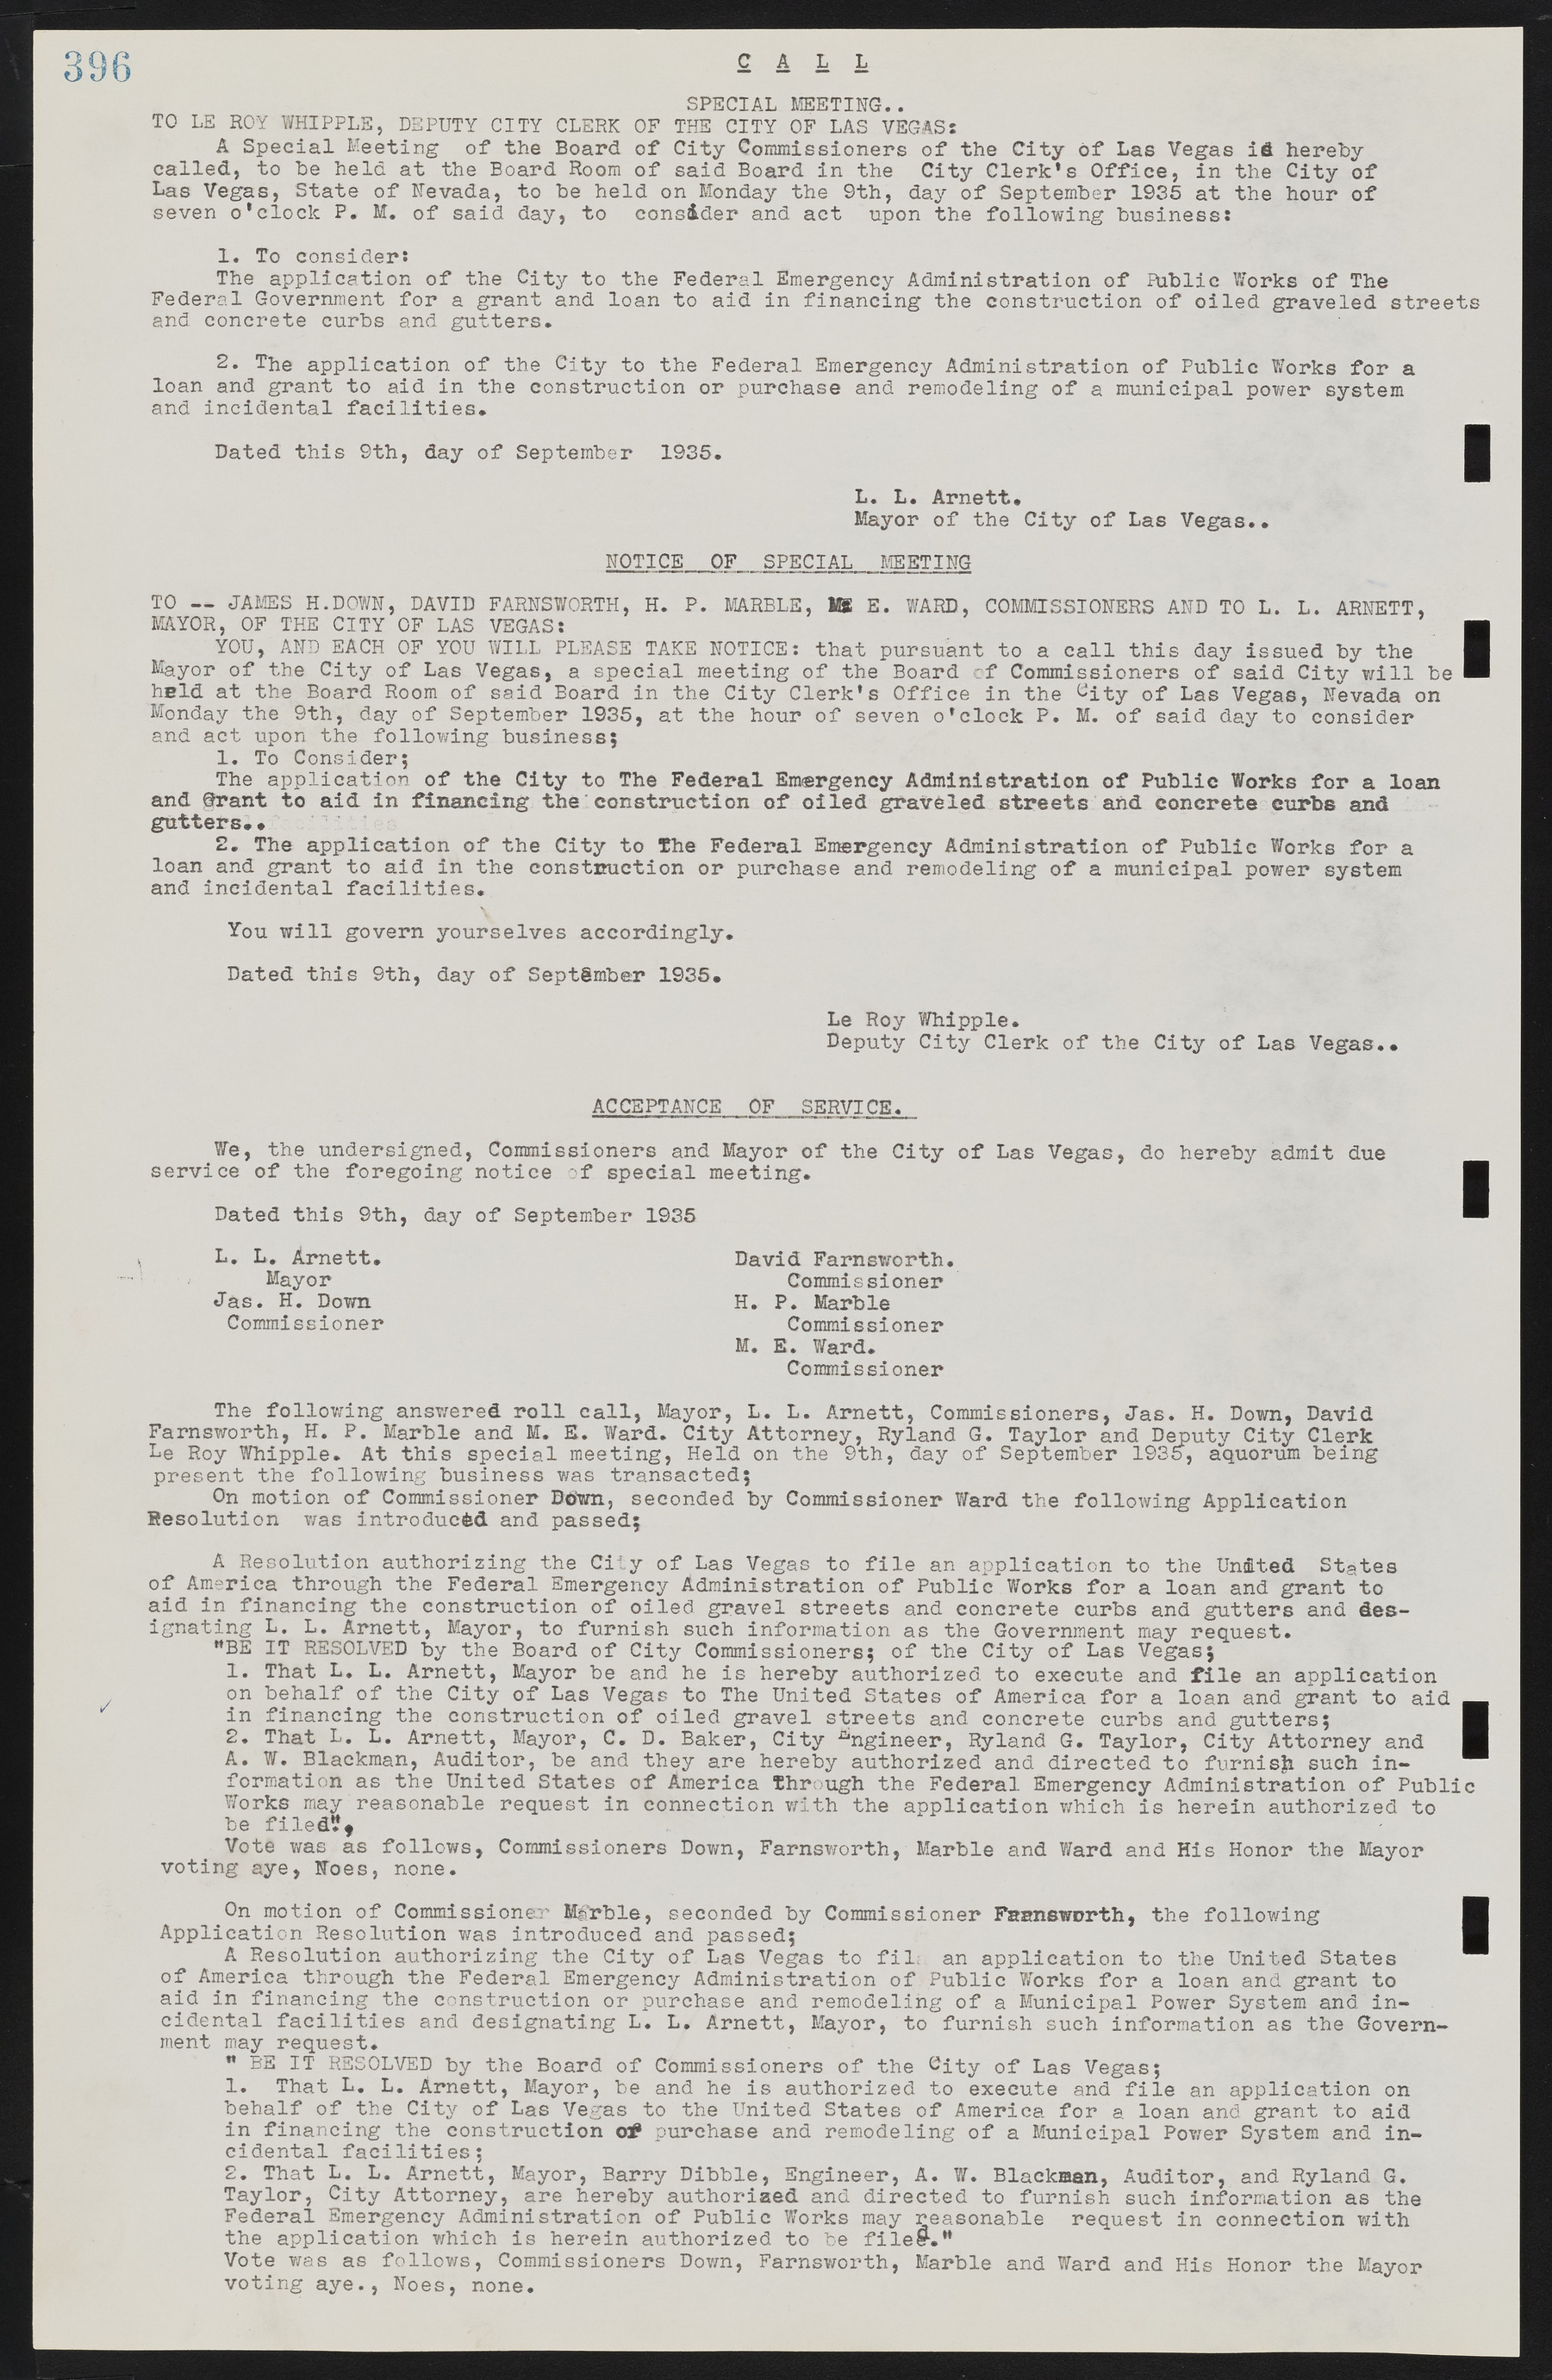 Las Vegas City Commission Minutes, May 14, 1929 to February 11, 1937, lvc000003-403